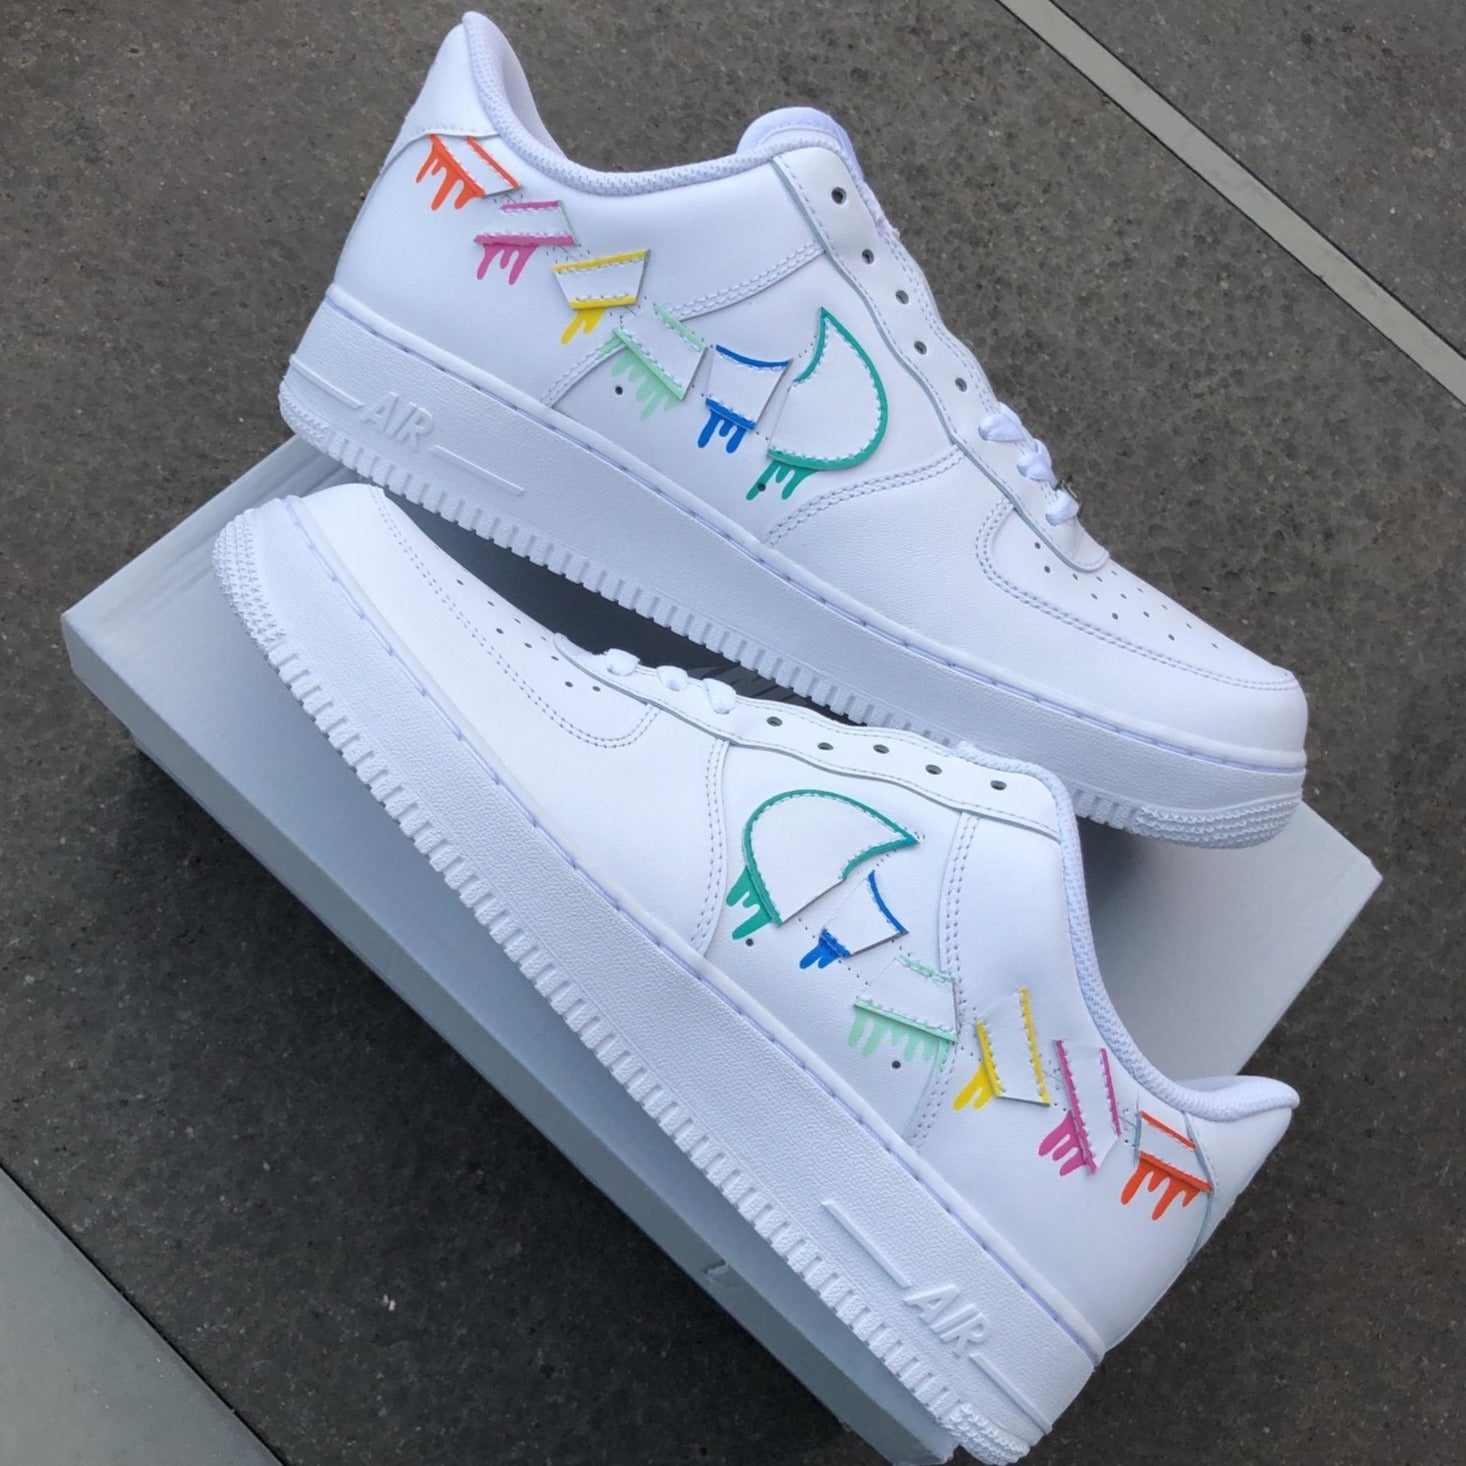 Custom AIR FORCE 1 - Destroyed swooshes drip (outlines) - TA Customs